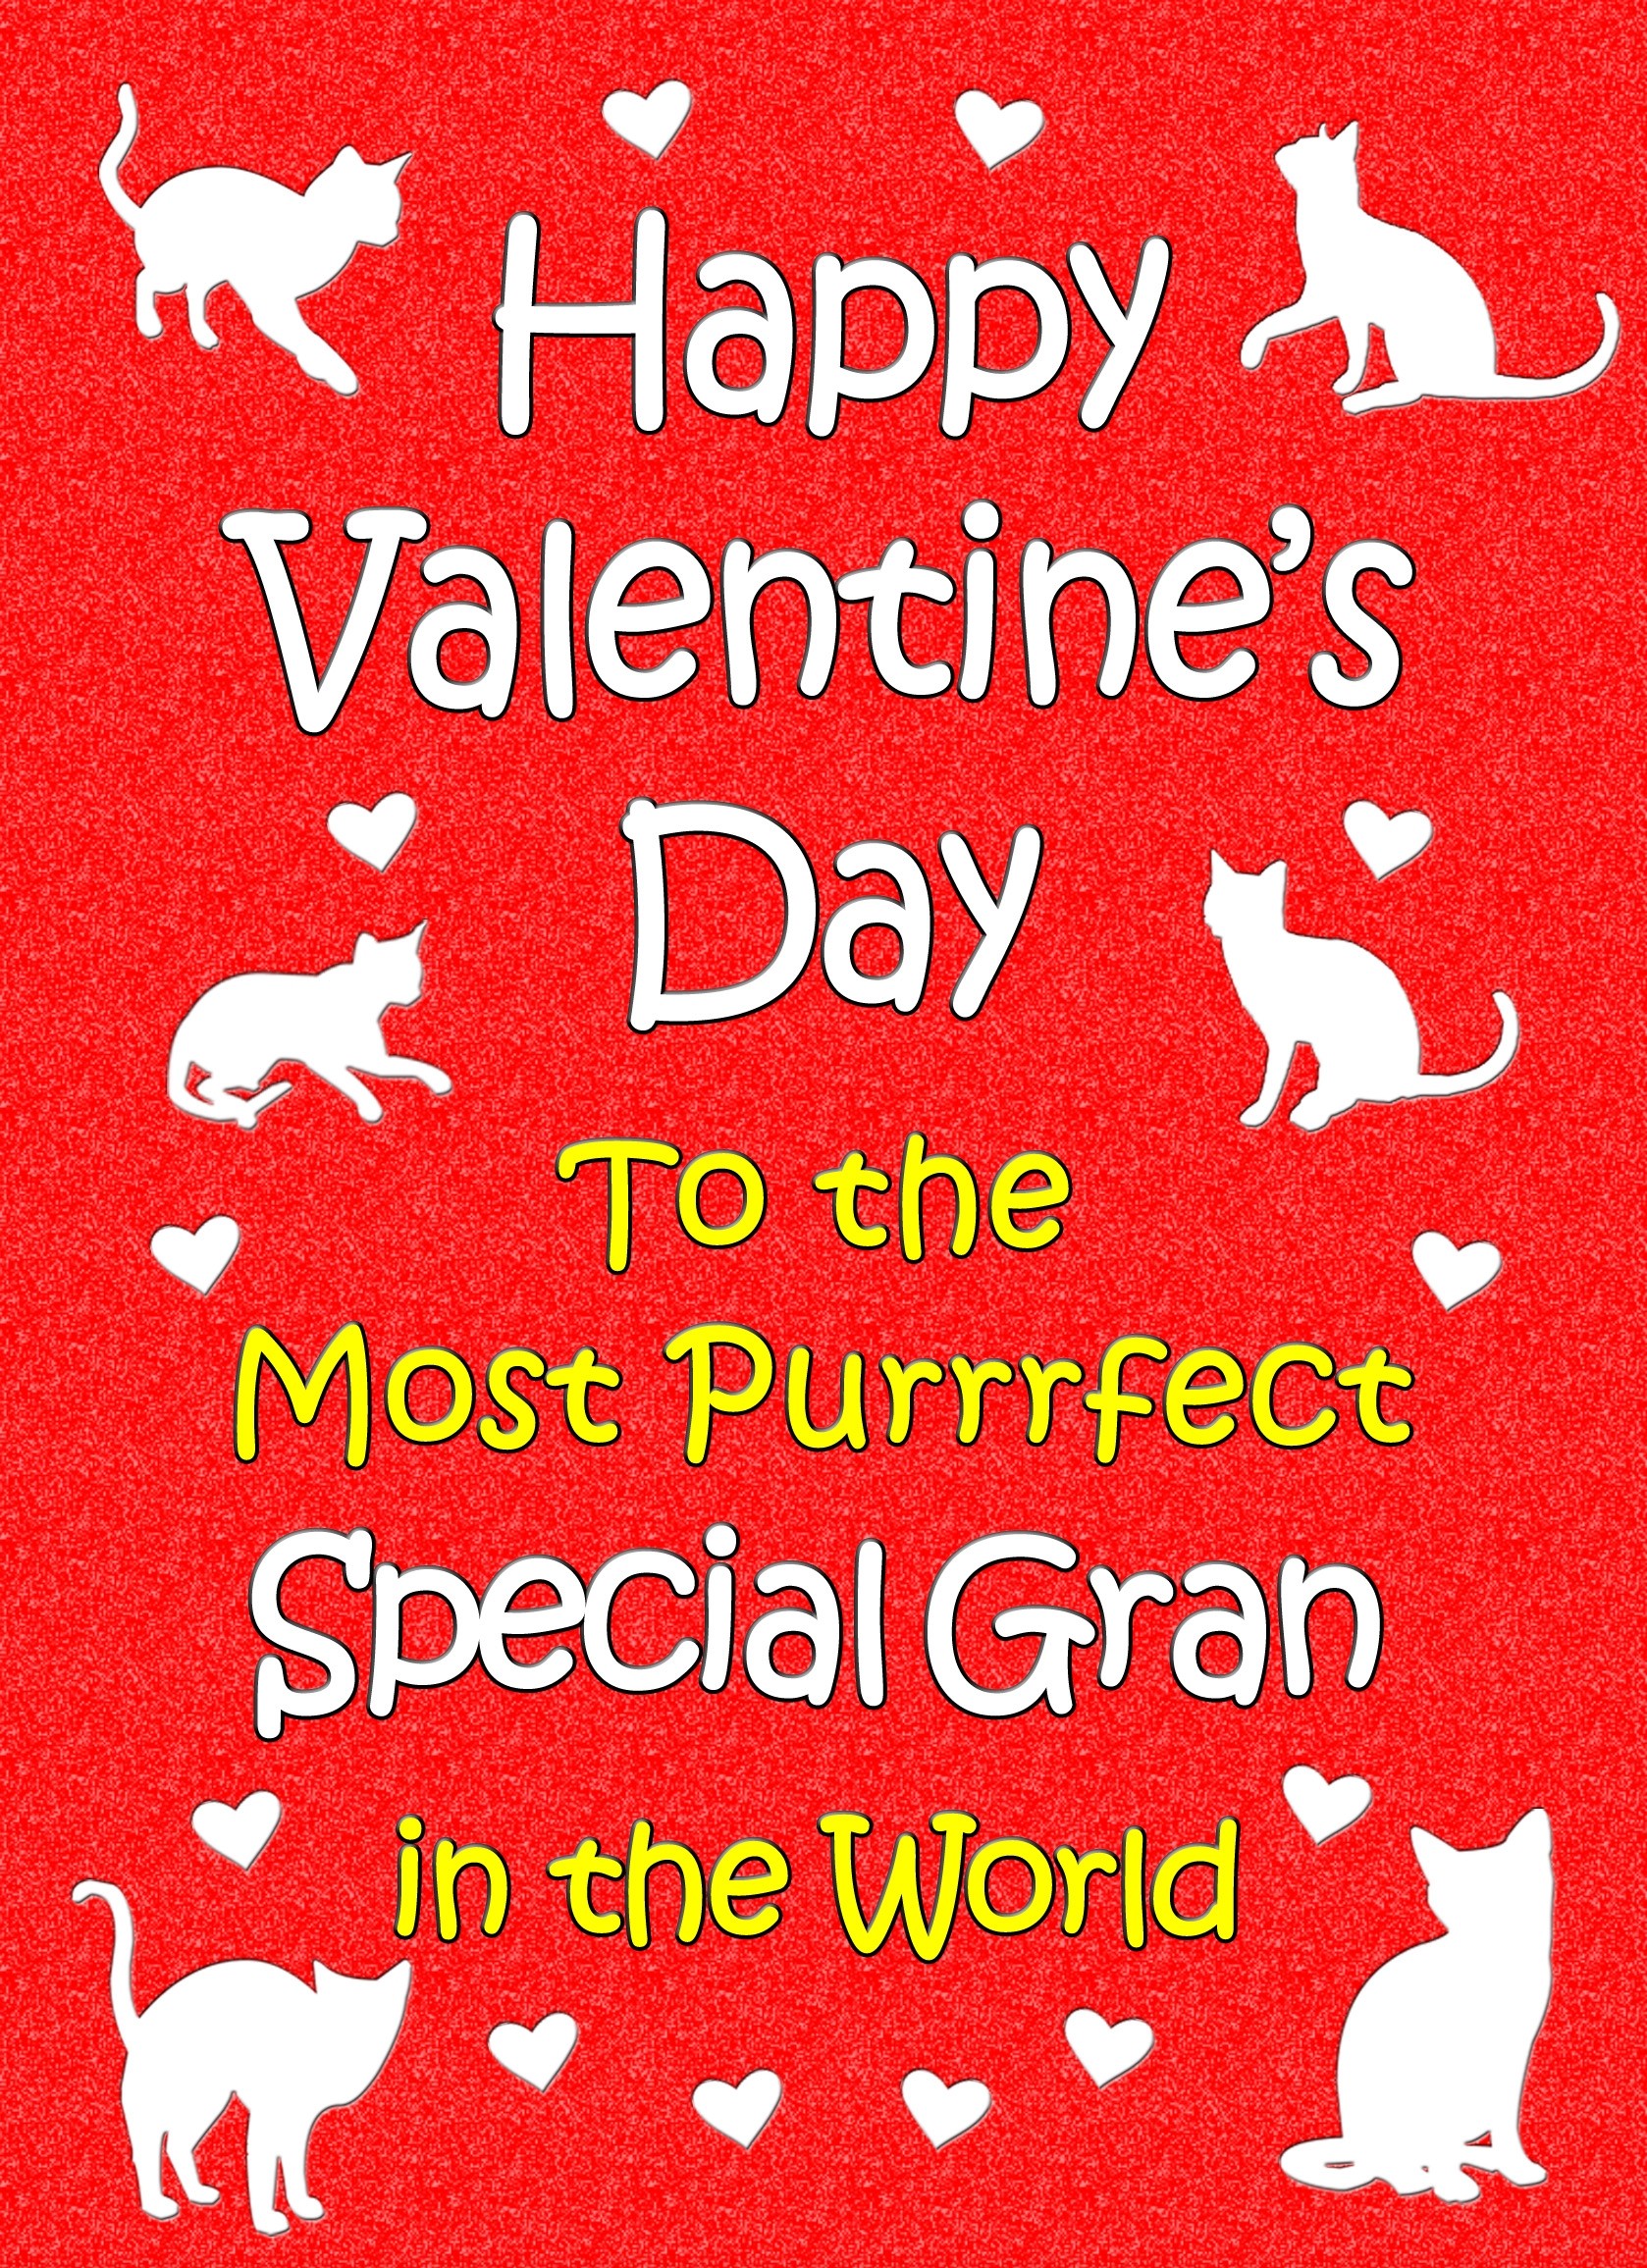 From The Cat Valentines Day Card (Special Gran)